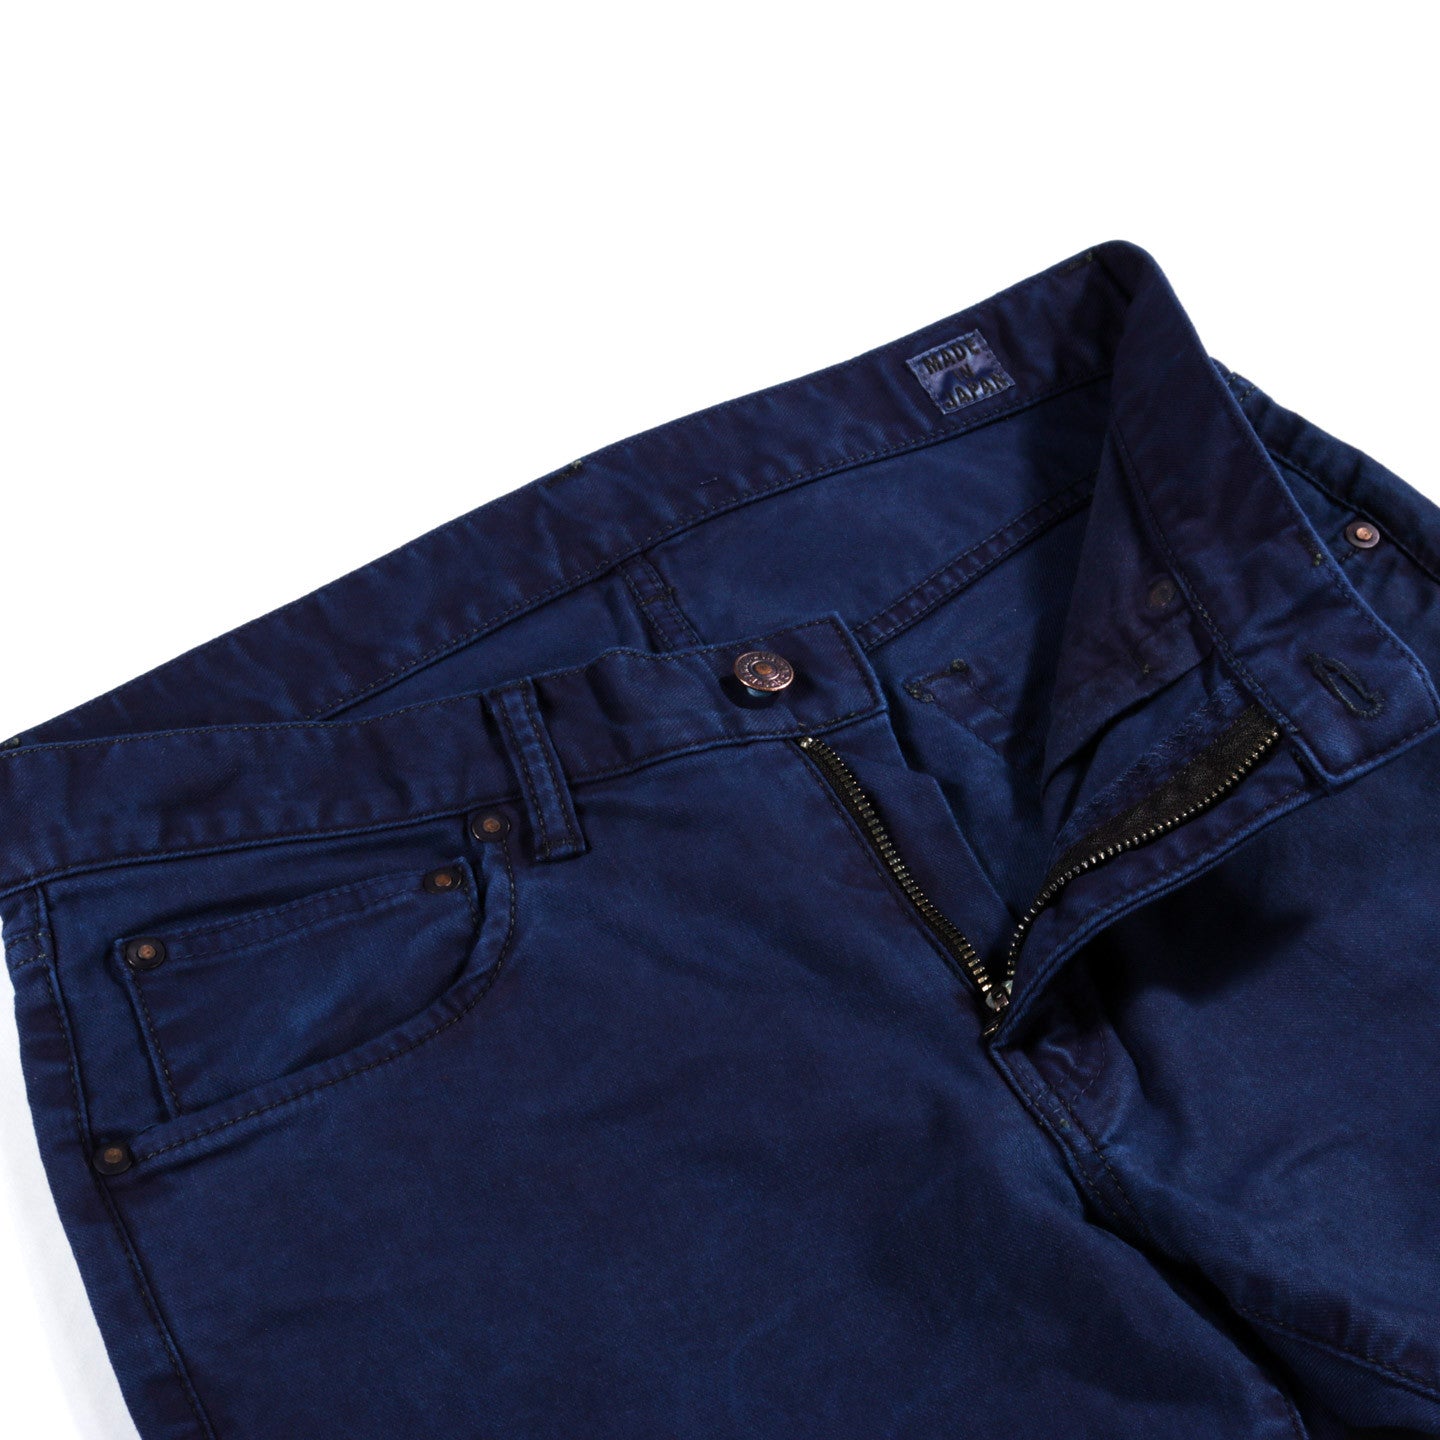 BLUE BLUE JAPAN STRETCH TWILL HAND DYED JEAN